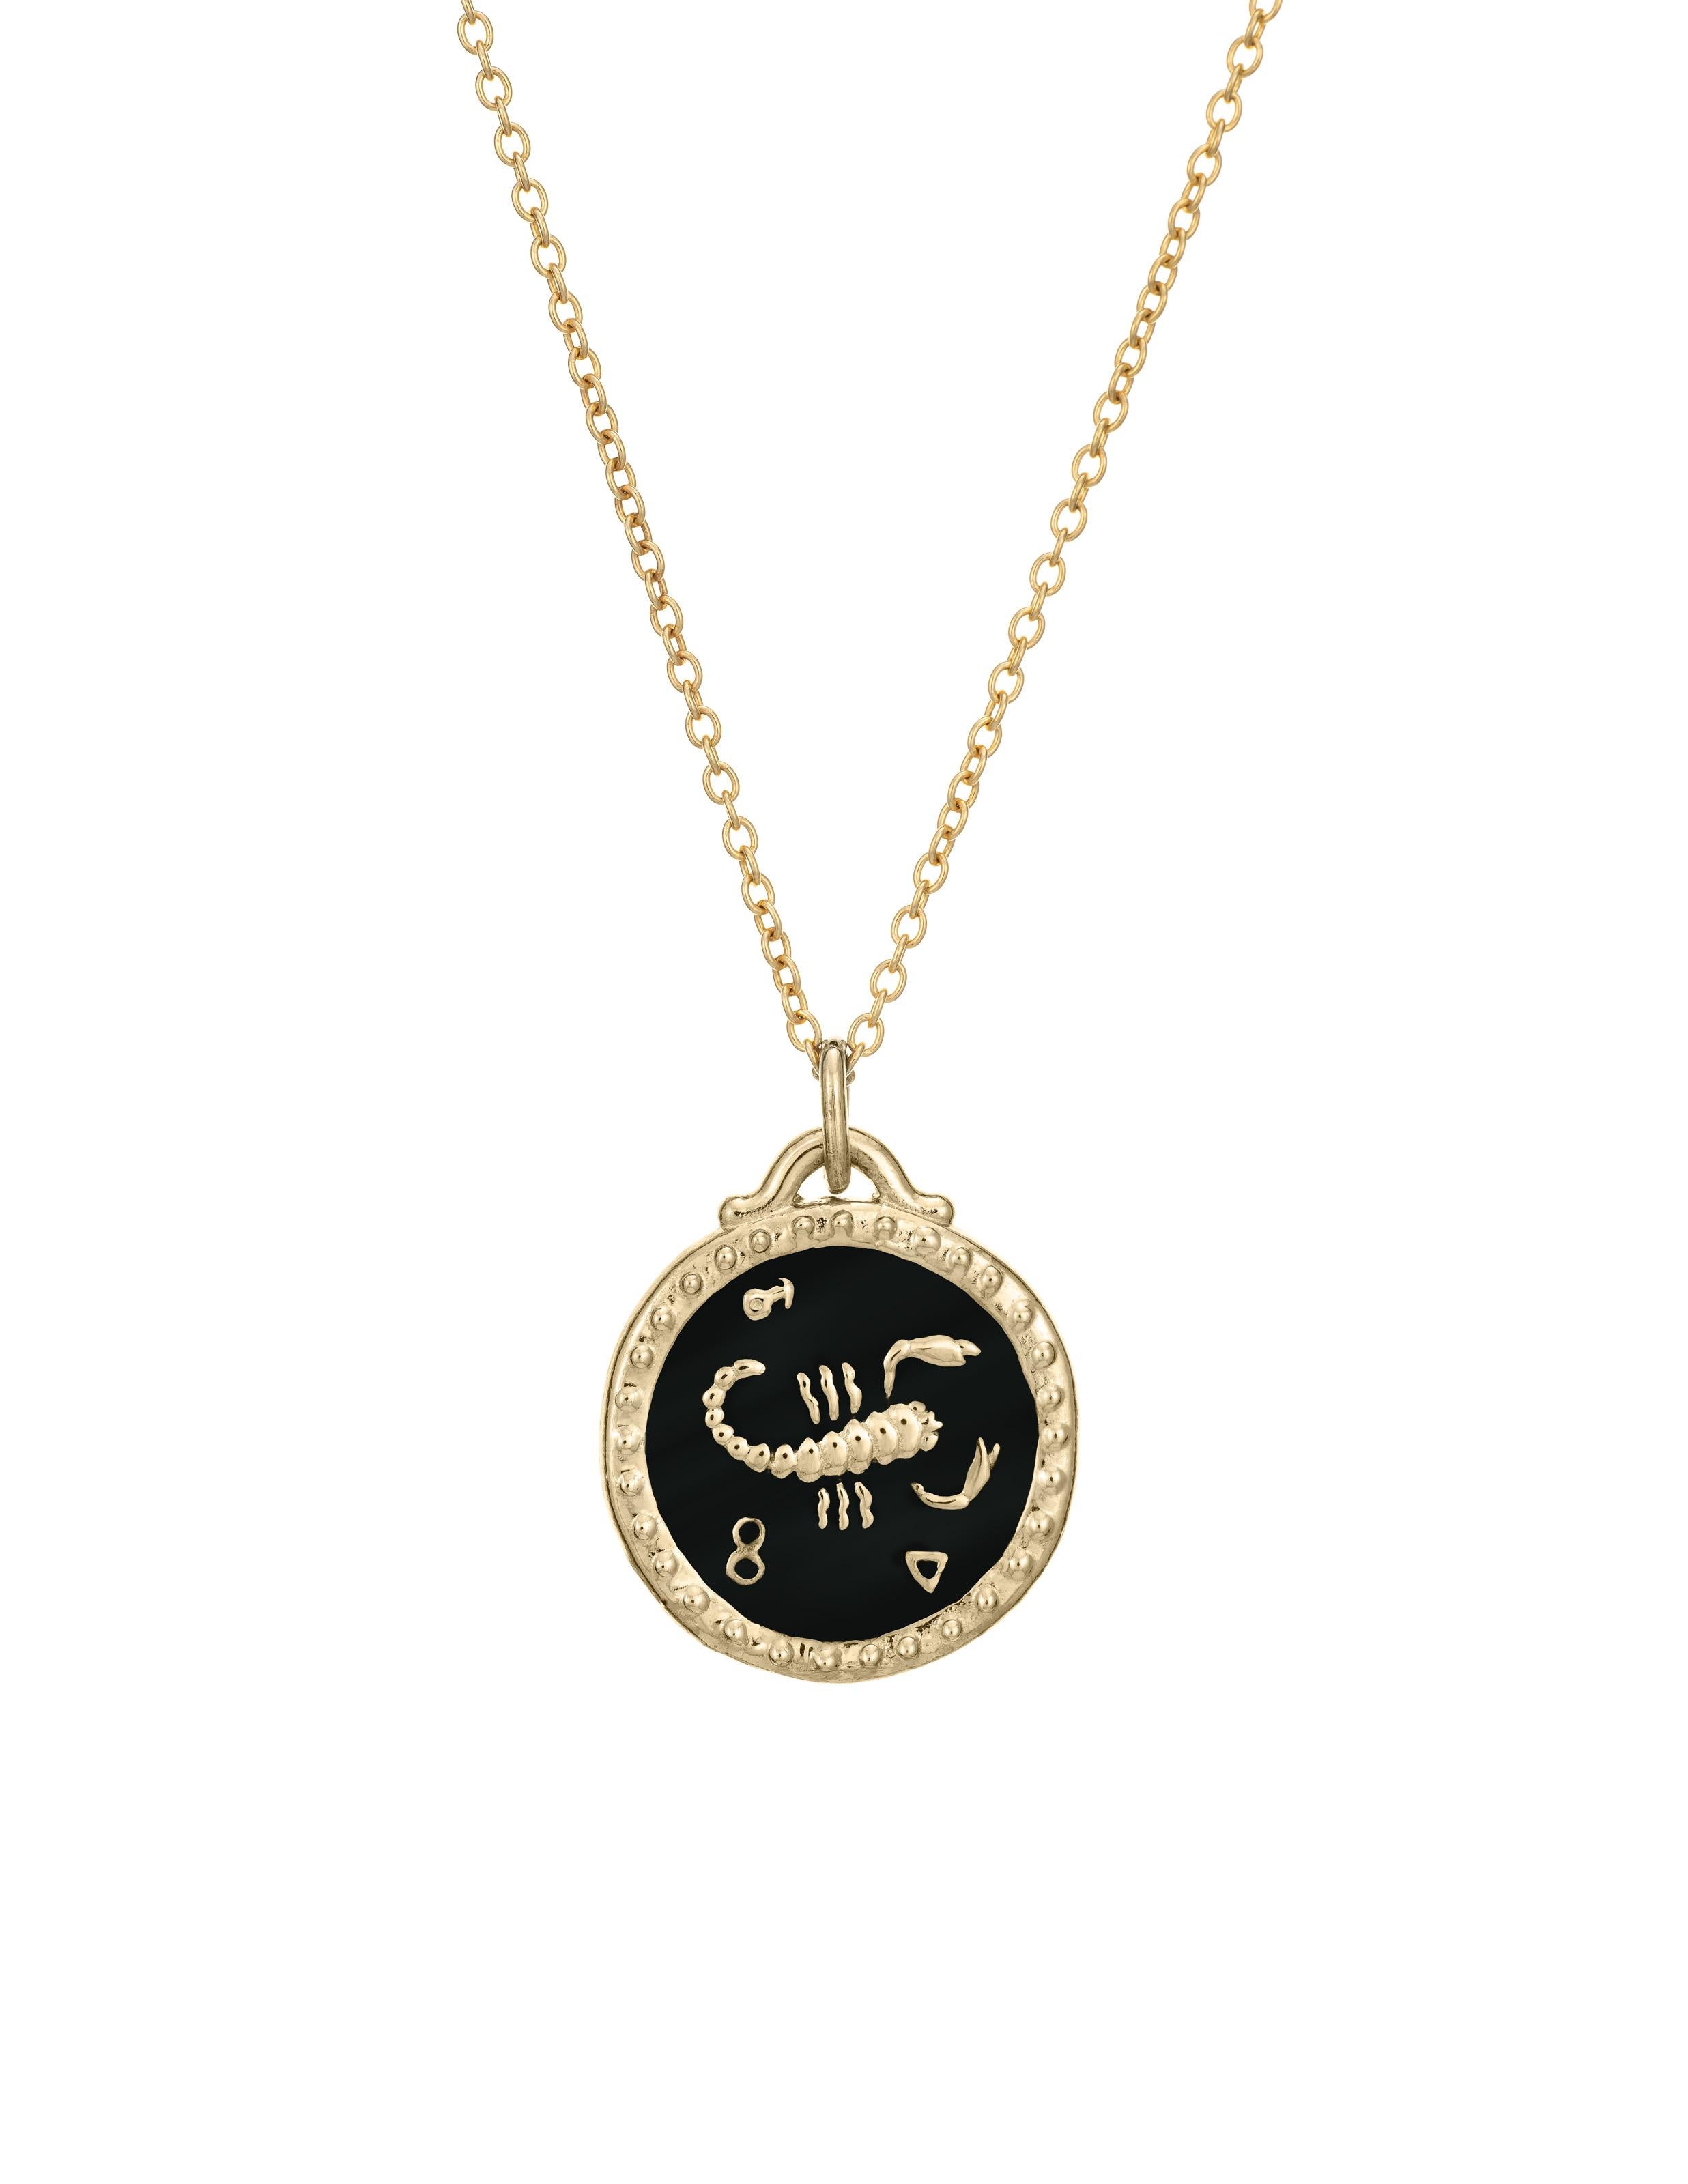 Part of our new Zodiac collection. The Scorpio Pendant features a scorpion on one side and the Scorpio symbol on the other. Designs are meticulously hand-carved into 14k gold and finished with enamel. This pendant is customizable and available in